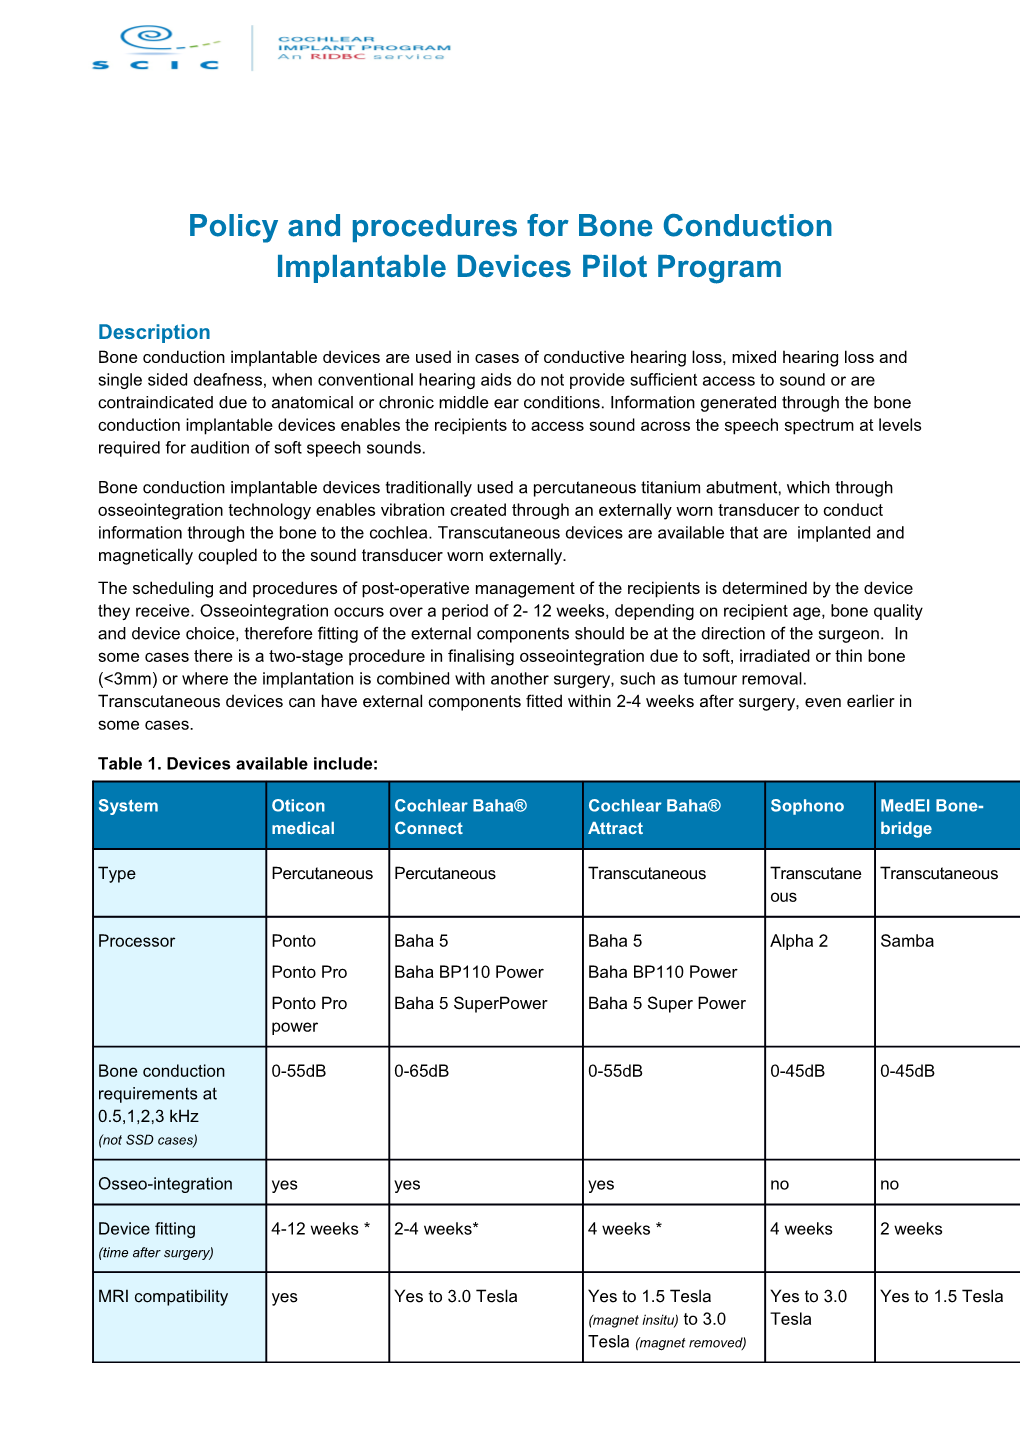 Policy and Procedures for Bone Conduction Implantable Devices Pilot Program